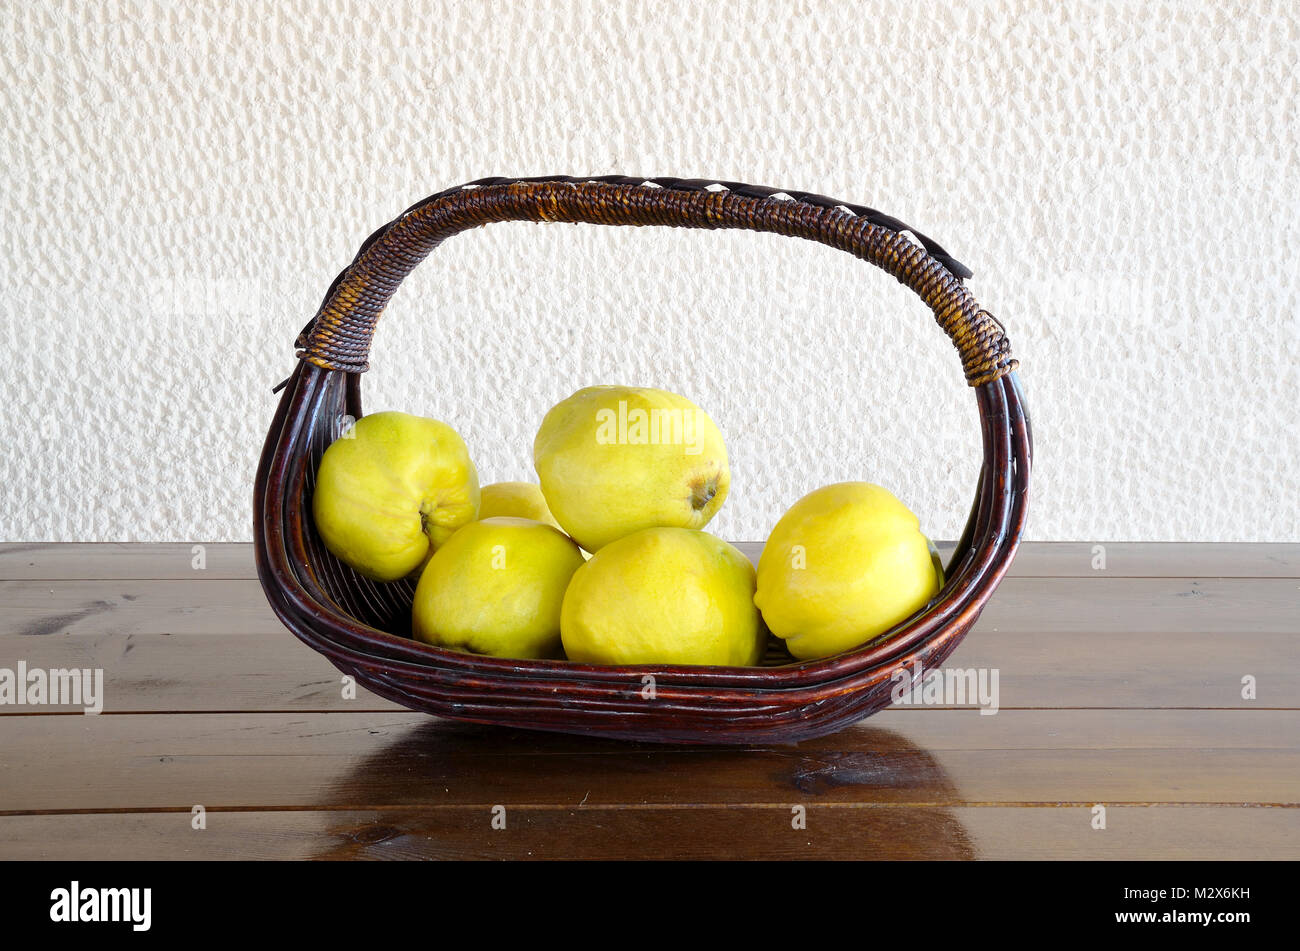 Basket of quinces on a wooden table Stock Photo